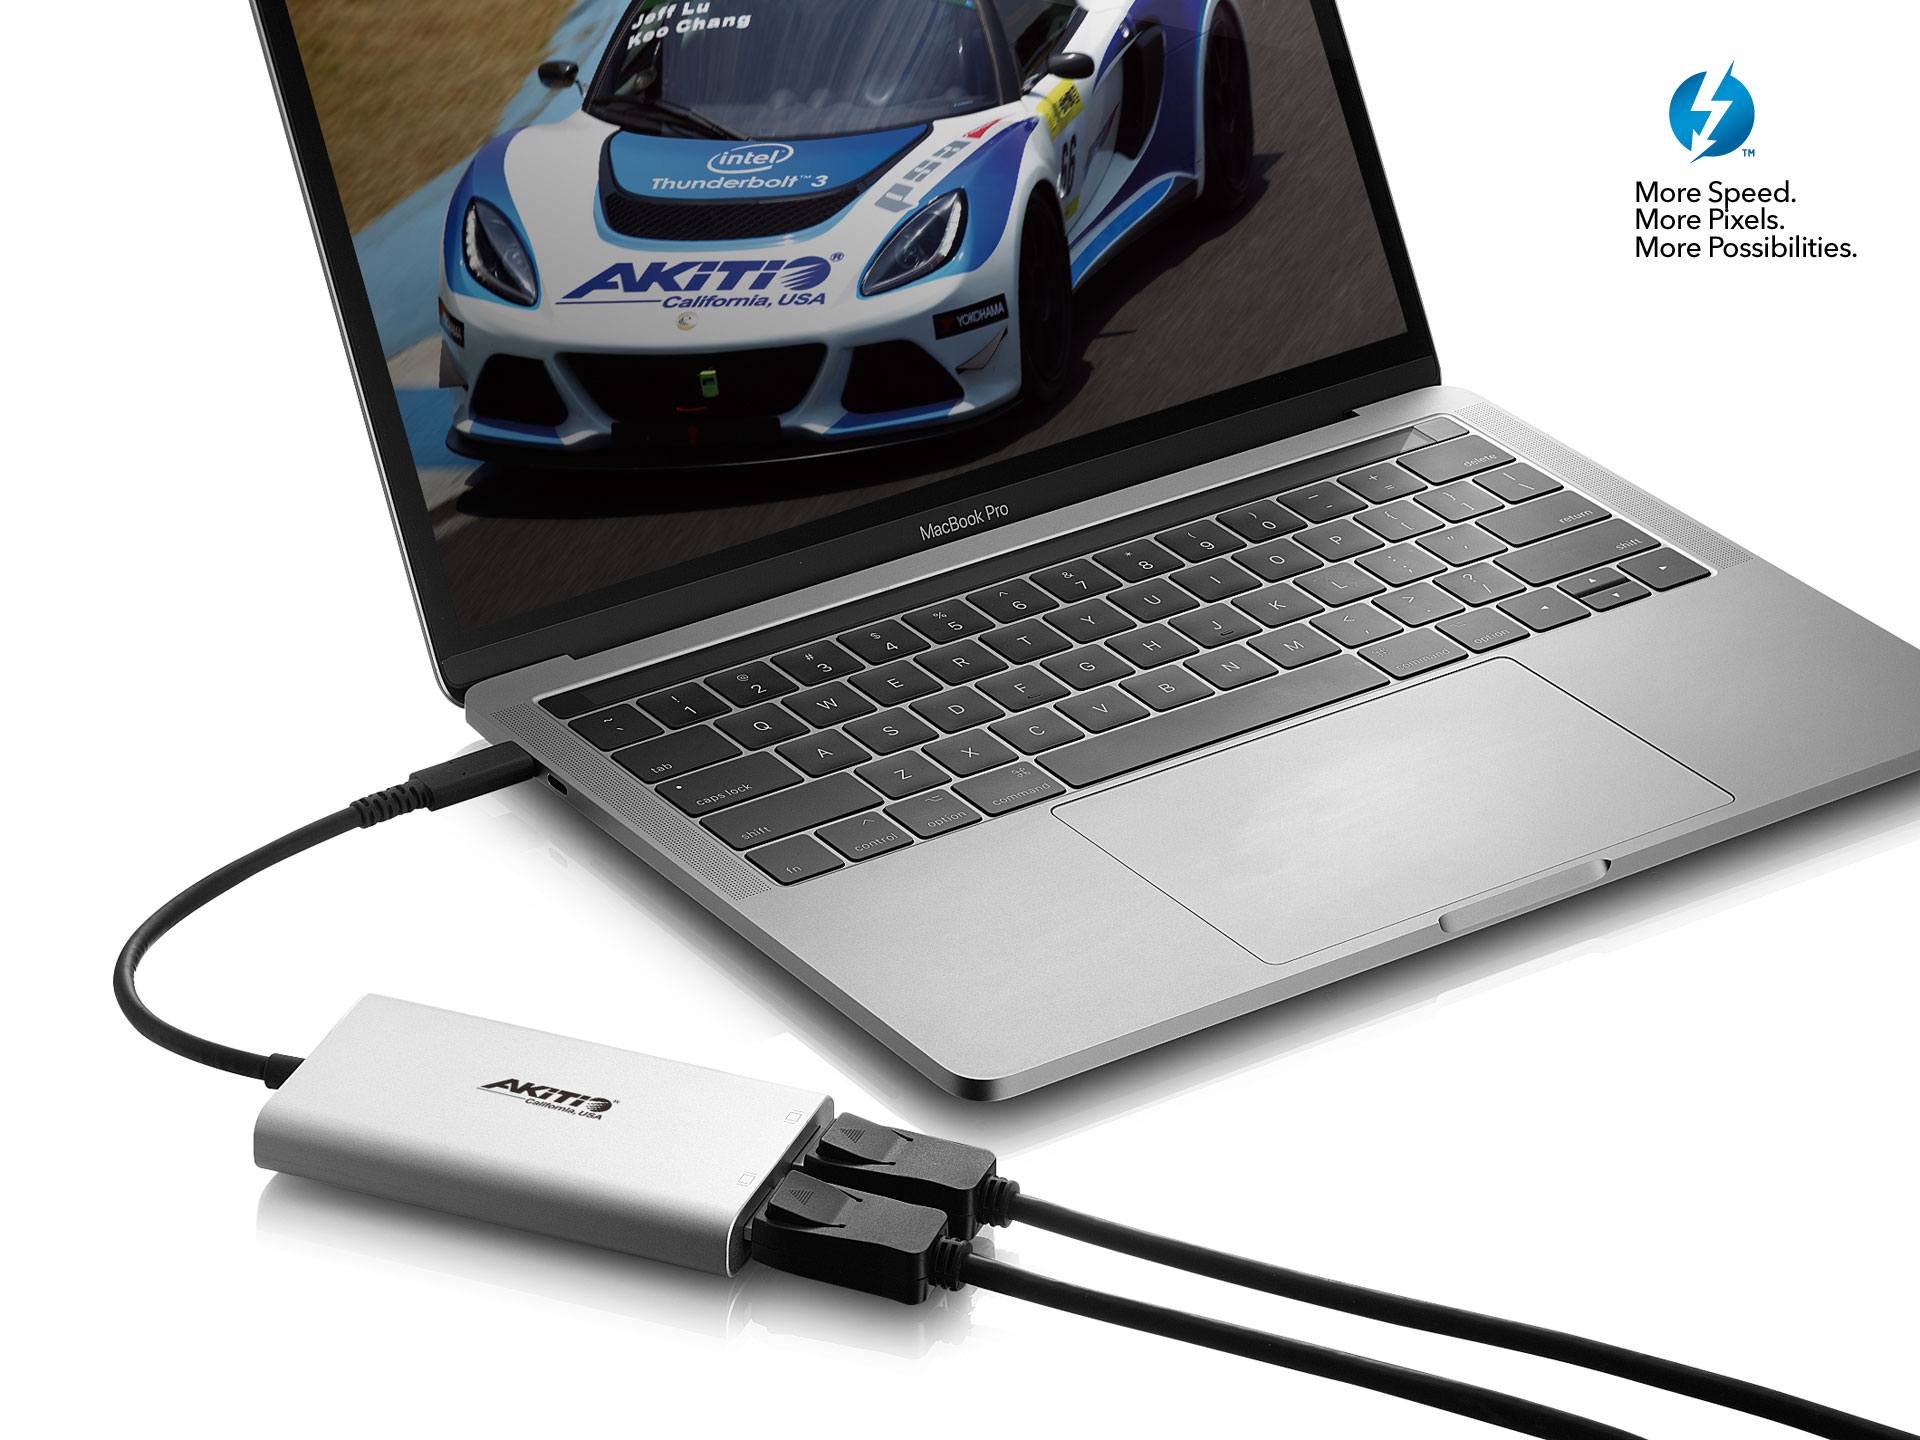 AKiTiO 40Gbps Thunderbolt 3 Cable (2m)